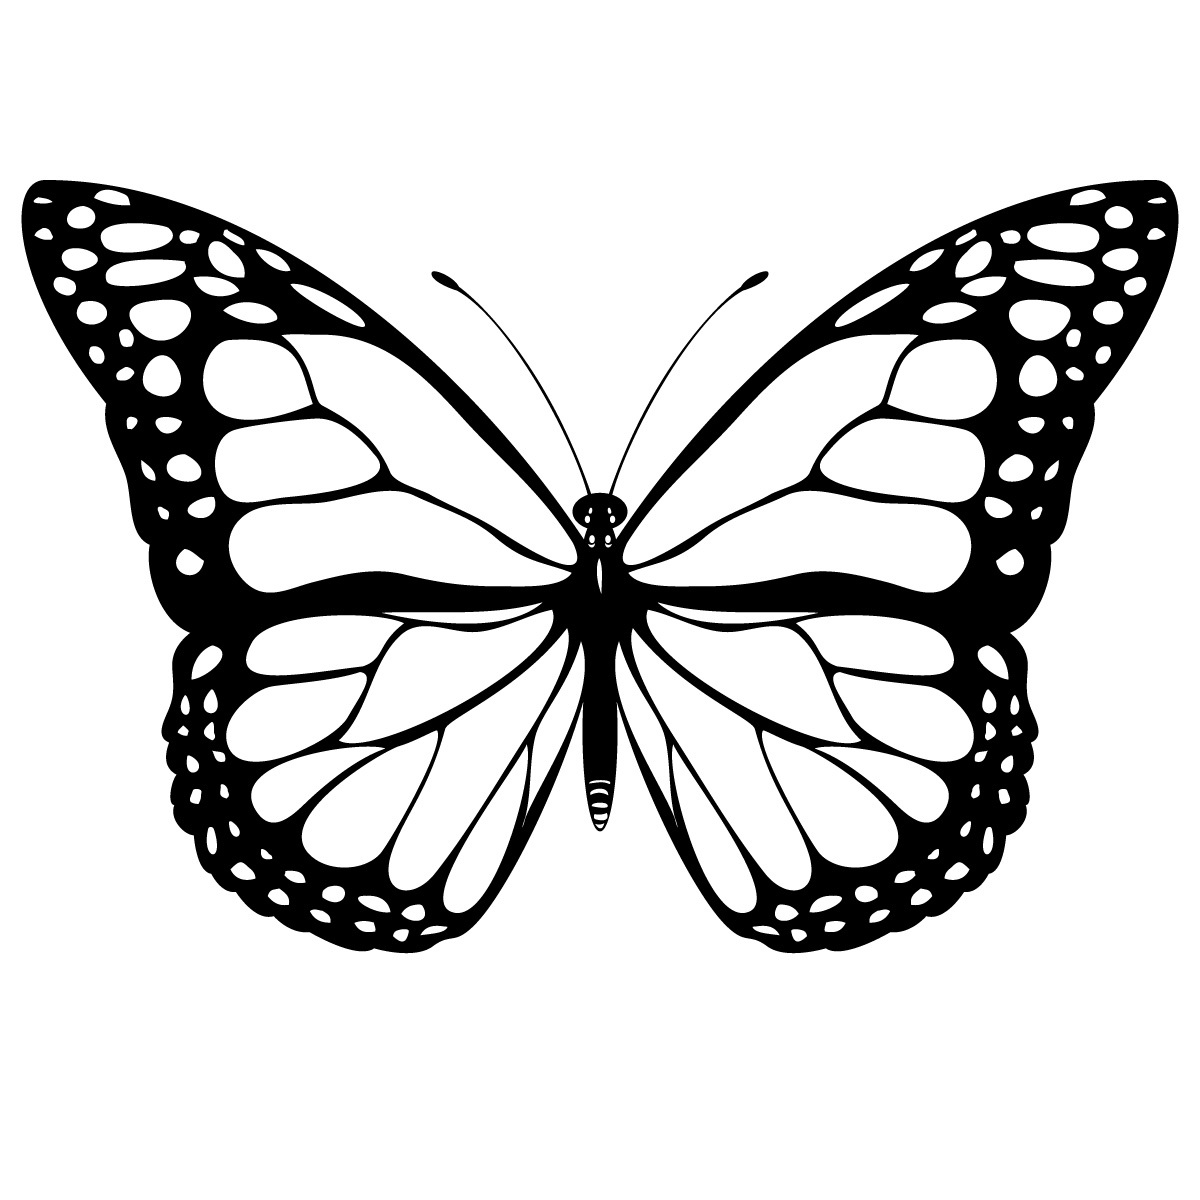  Butterfly coloring pages | Butterfly coloring pages for kids | #14